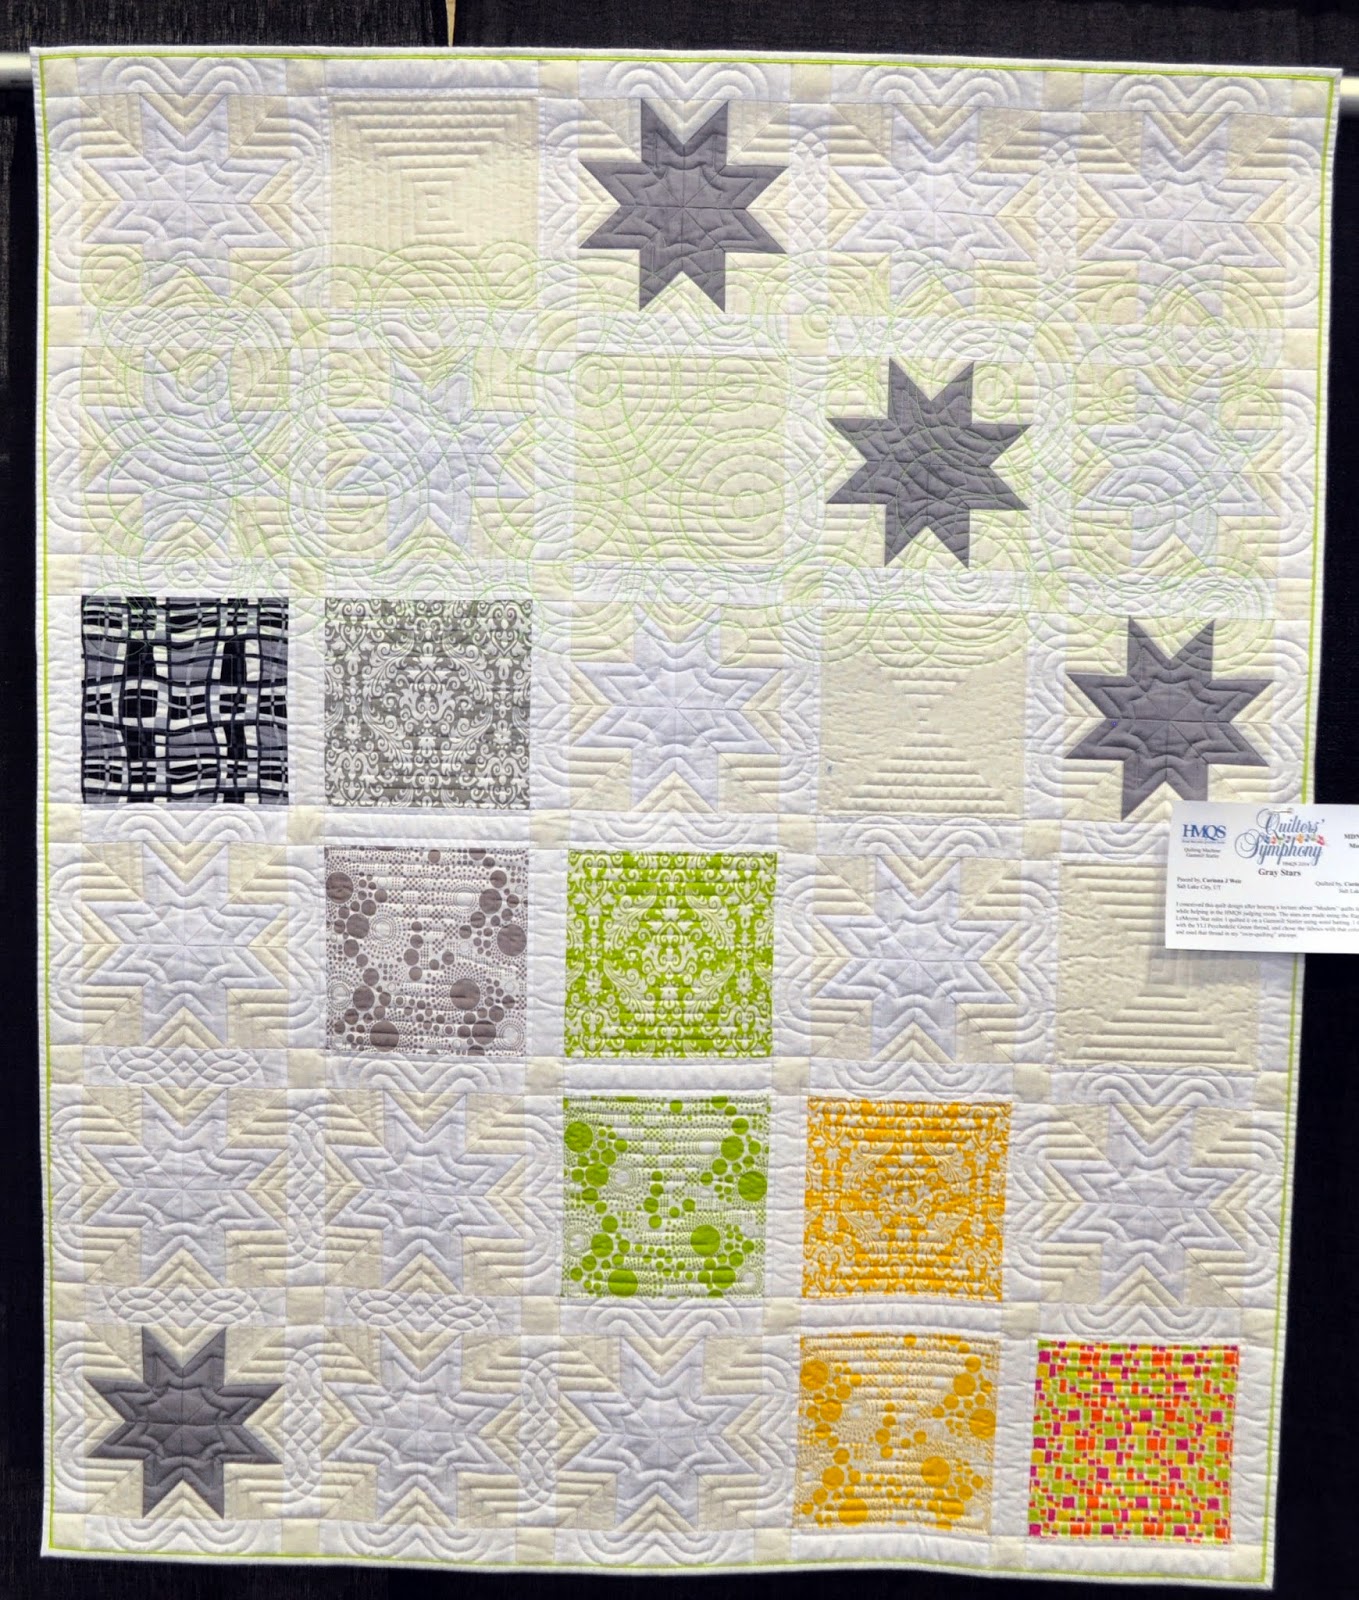 Richard and Tanya Quilts: HMQS 2014 Quilts in Review